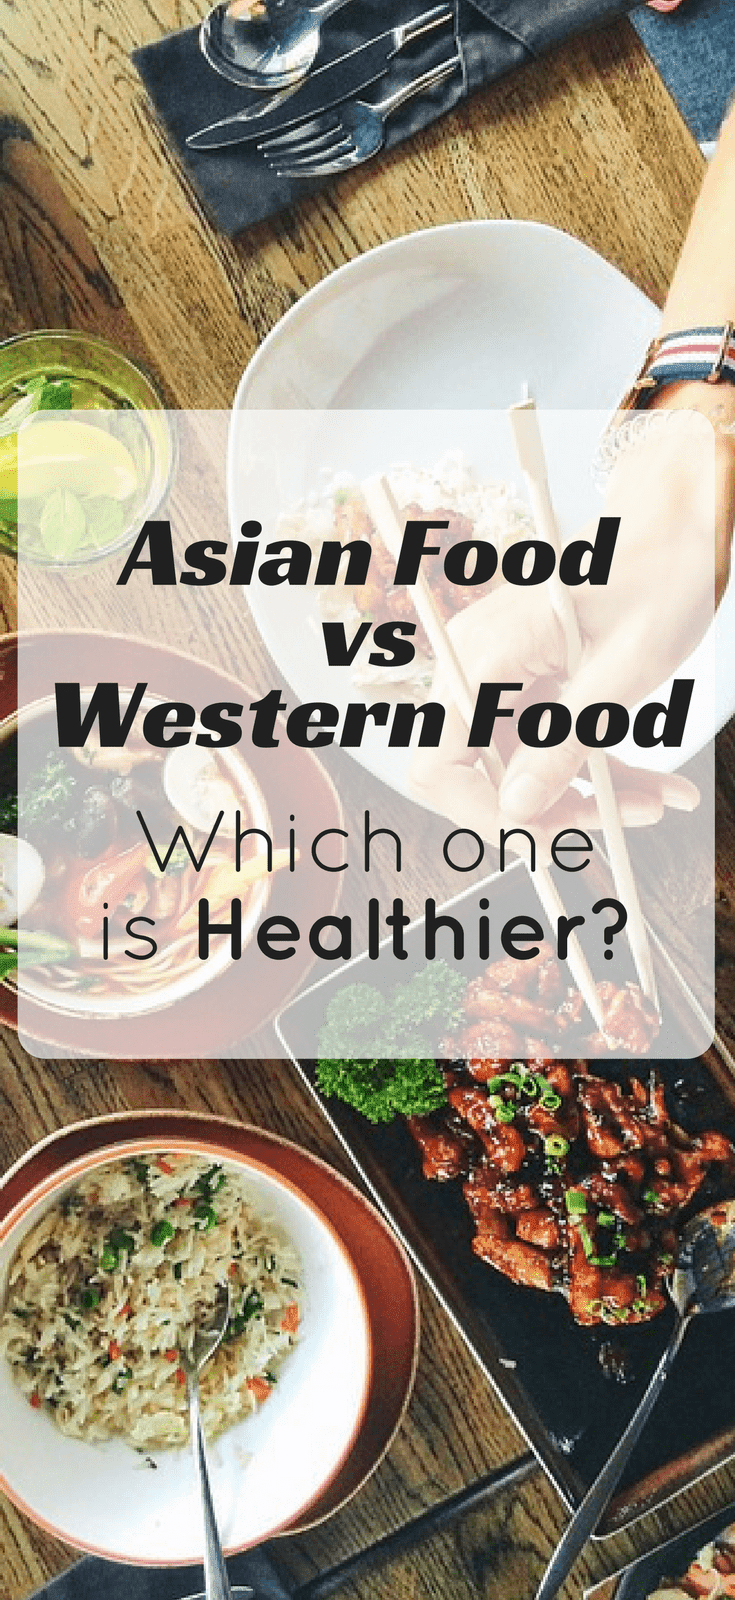 Asian Food vs Western Food – Which One Is Healthier?